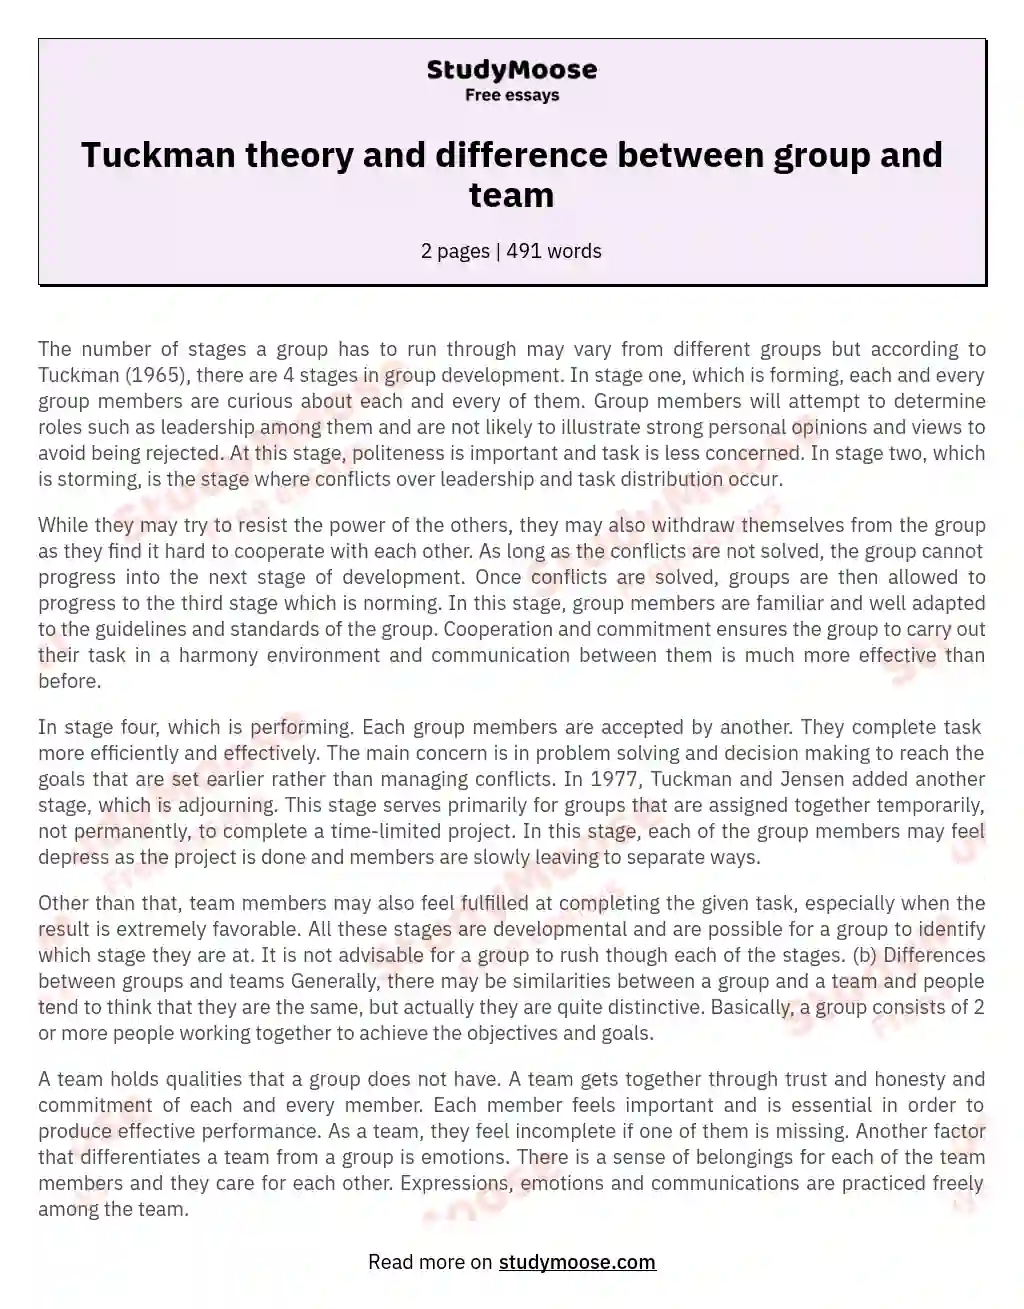 Tuckman theory and difference between group and team essay